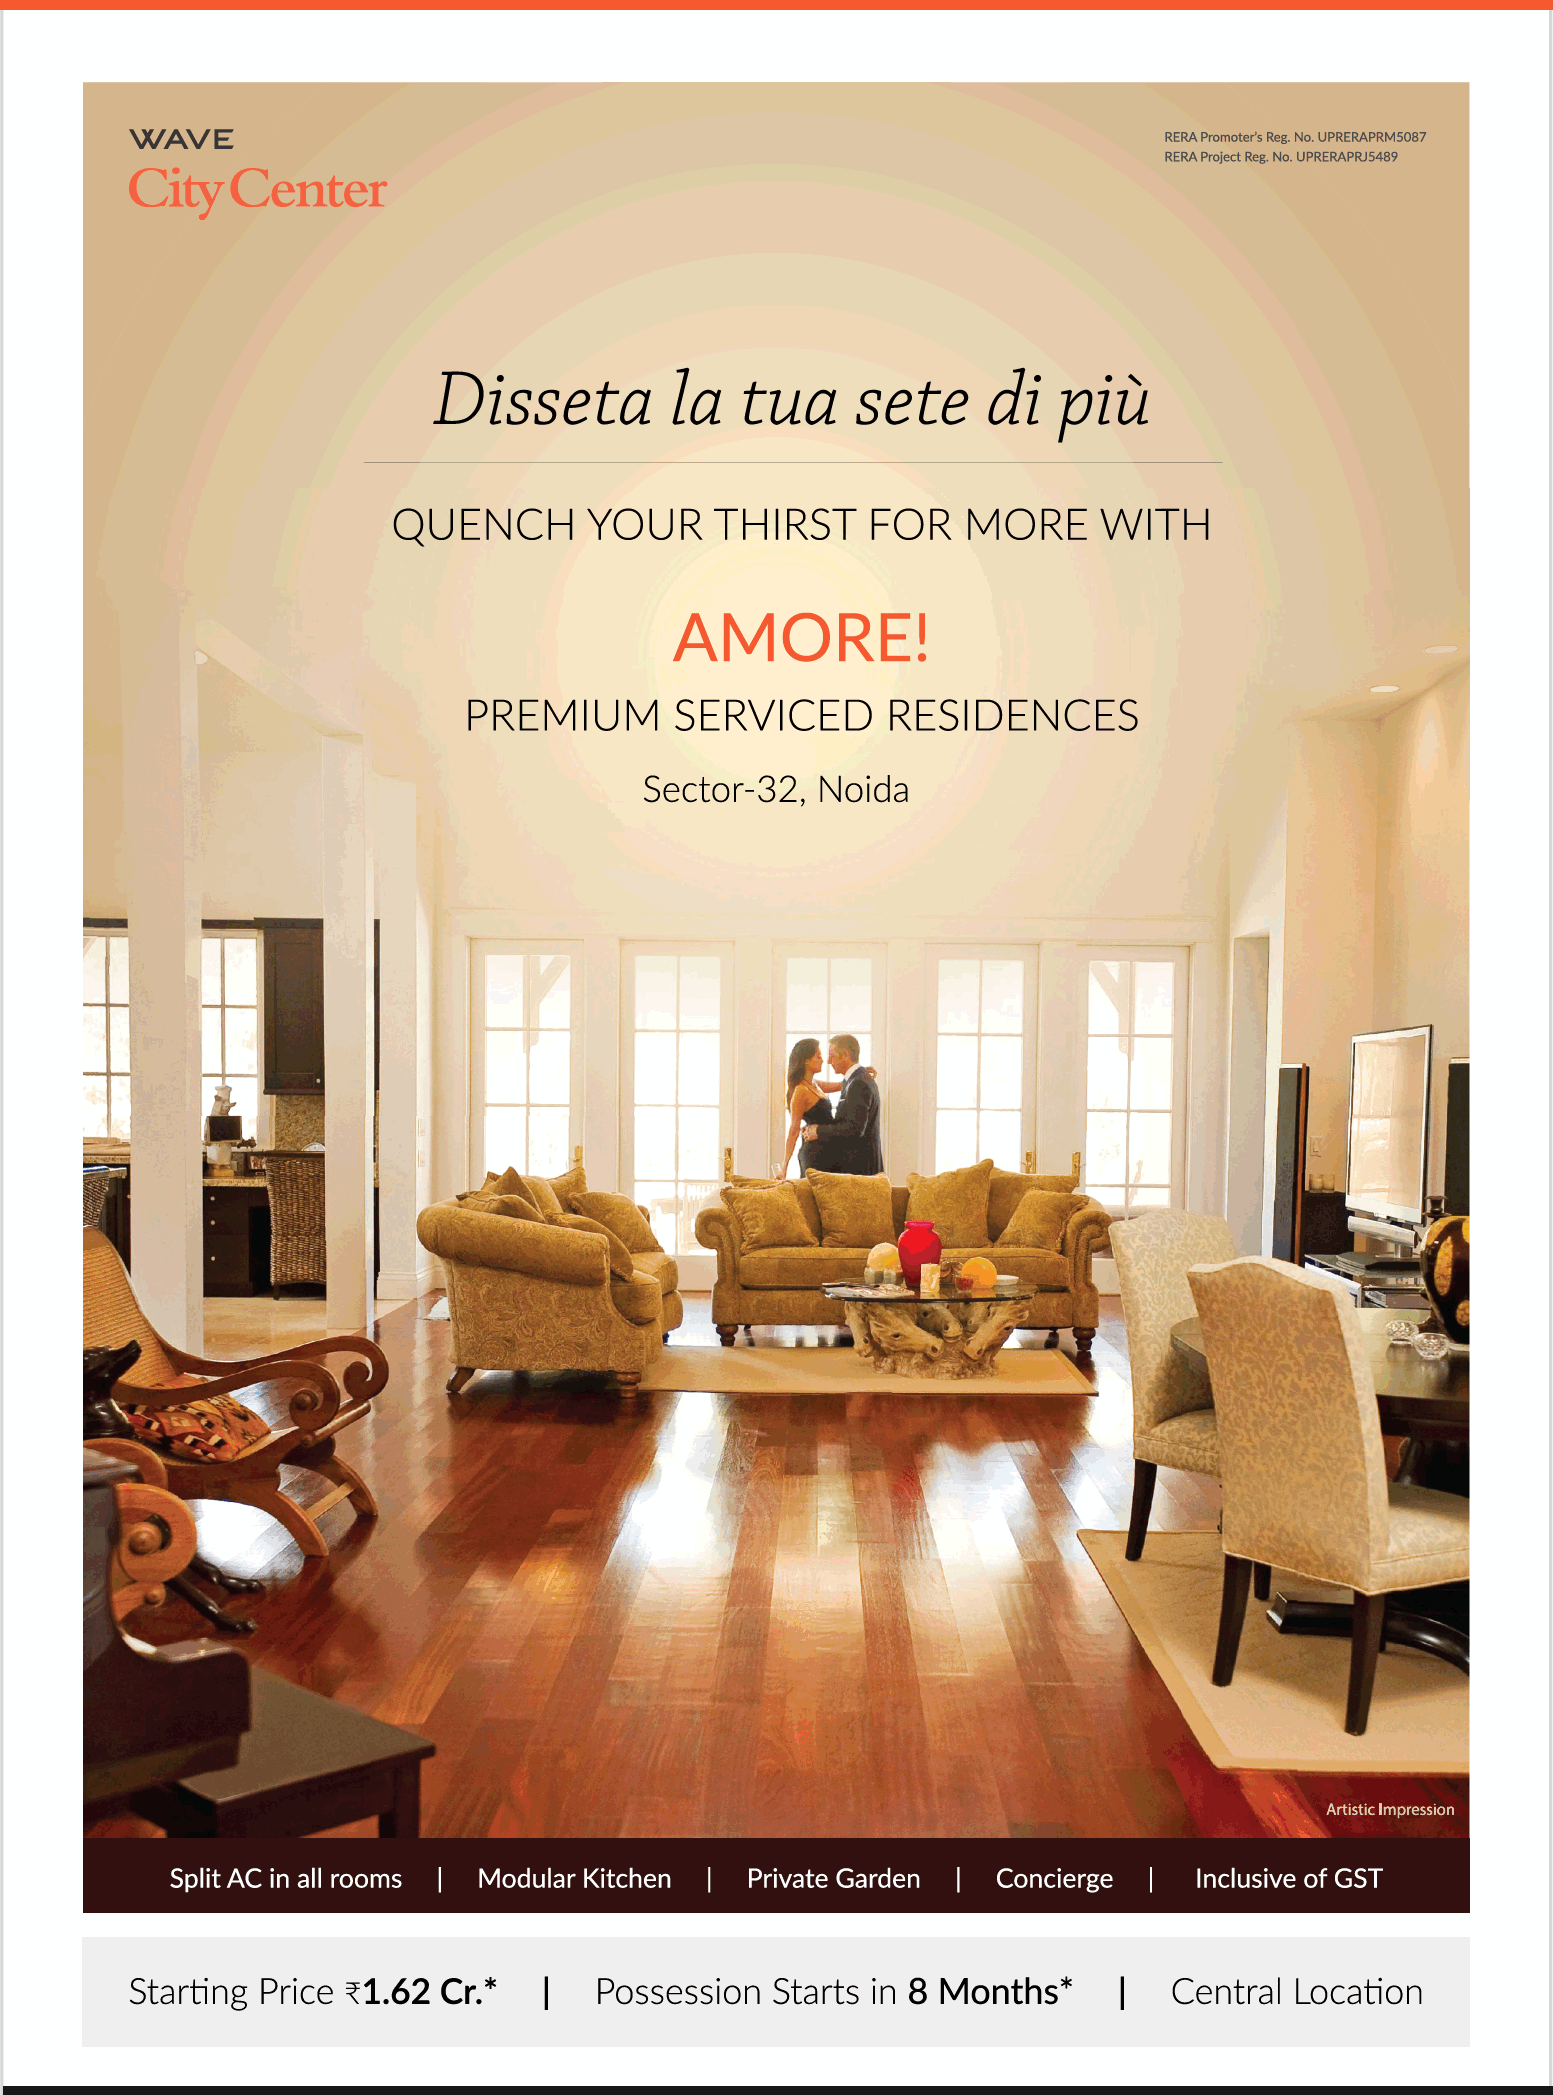 Avail premium services residences at Wave City Center Amore in Noida